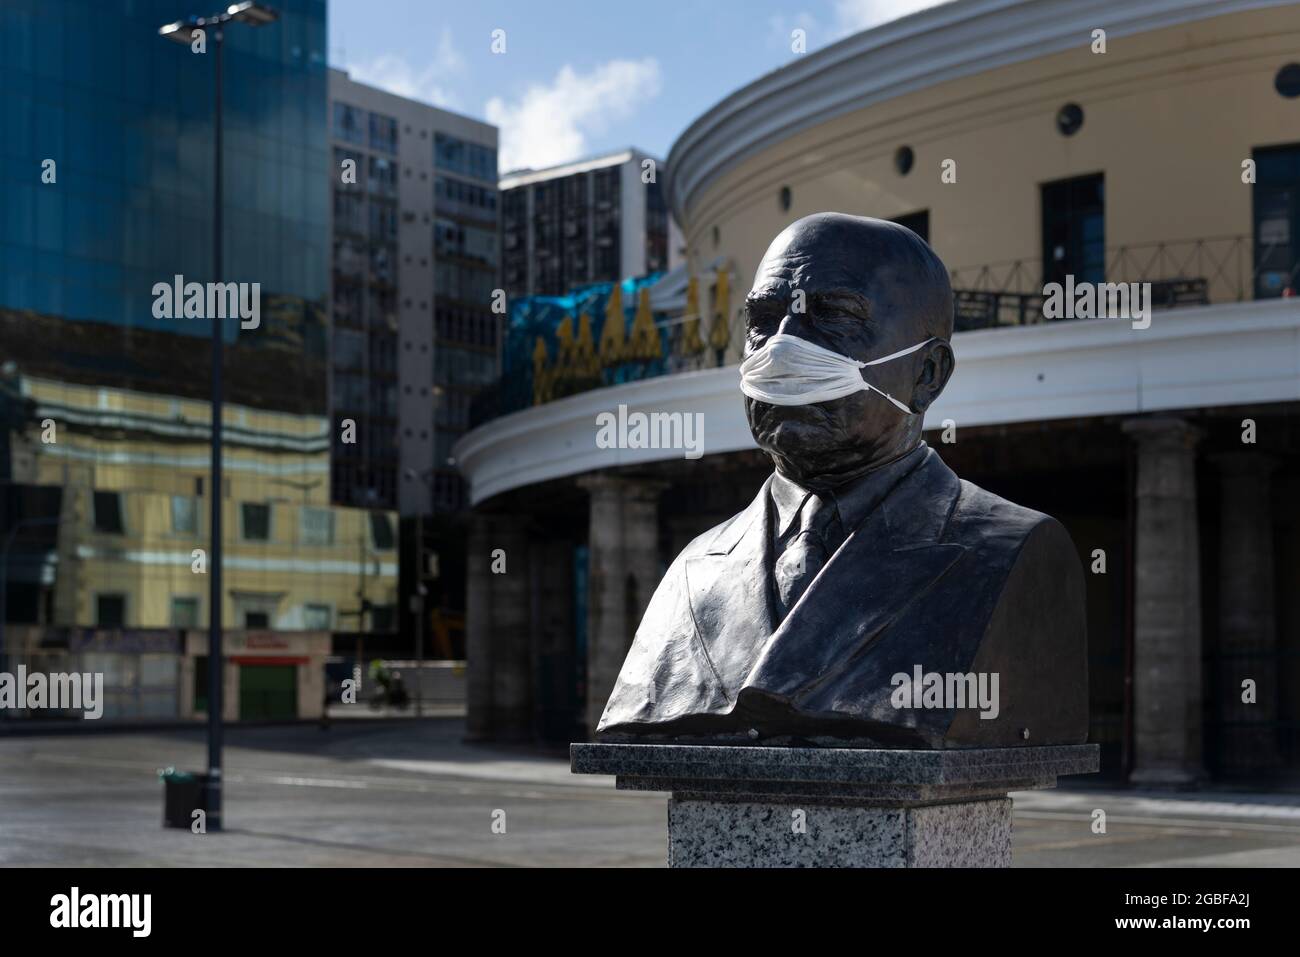 Salvador, Bahia, Brazil - May 27, 2020: Monument statue in Mercado Modelo square with protective mask on face. Stock Photo